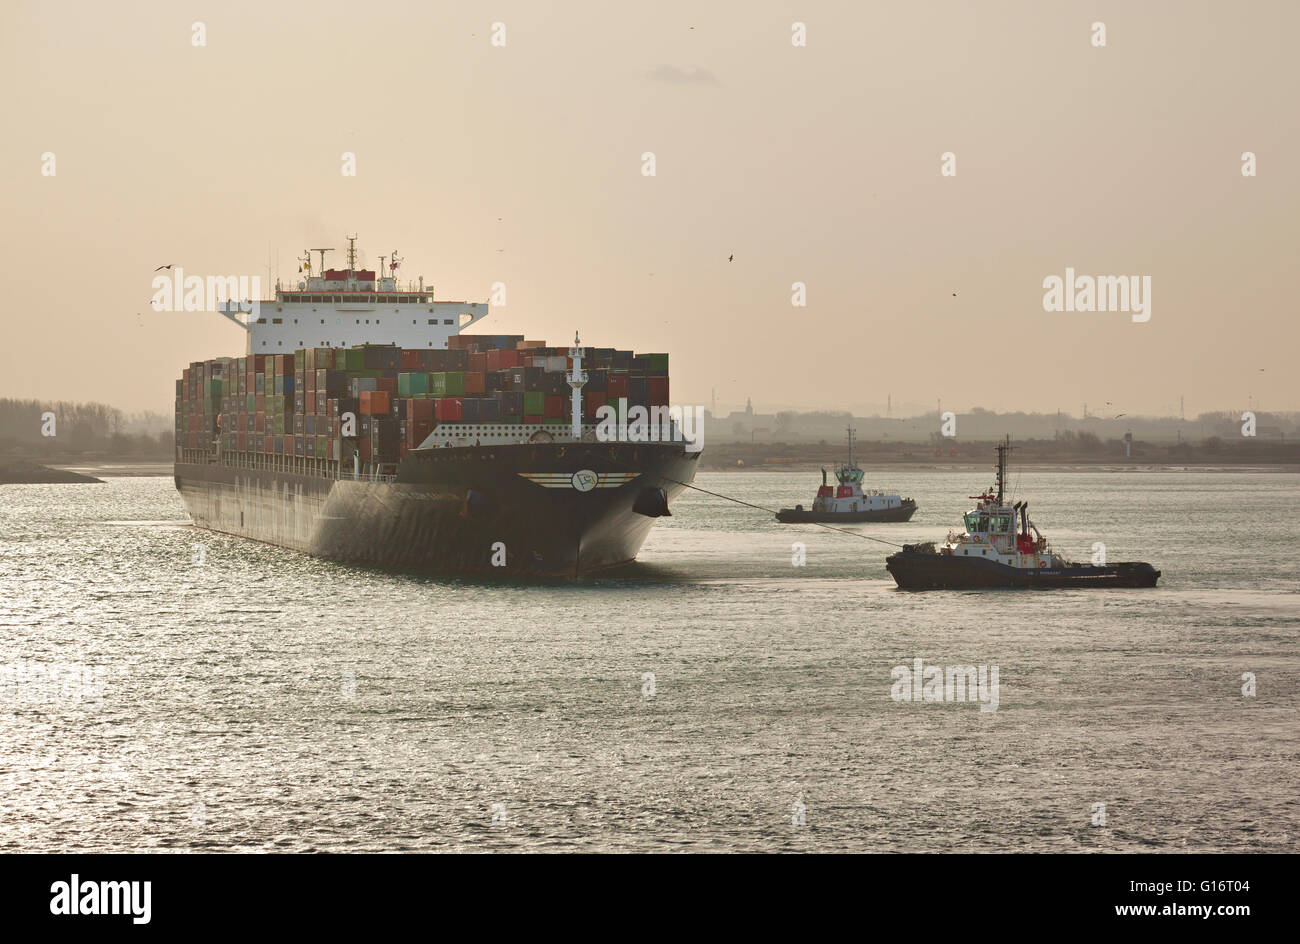 Tug boats assisting container ship by leaving Dunkirk Harbour Stock Photo